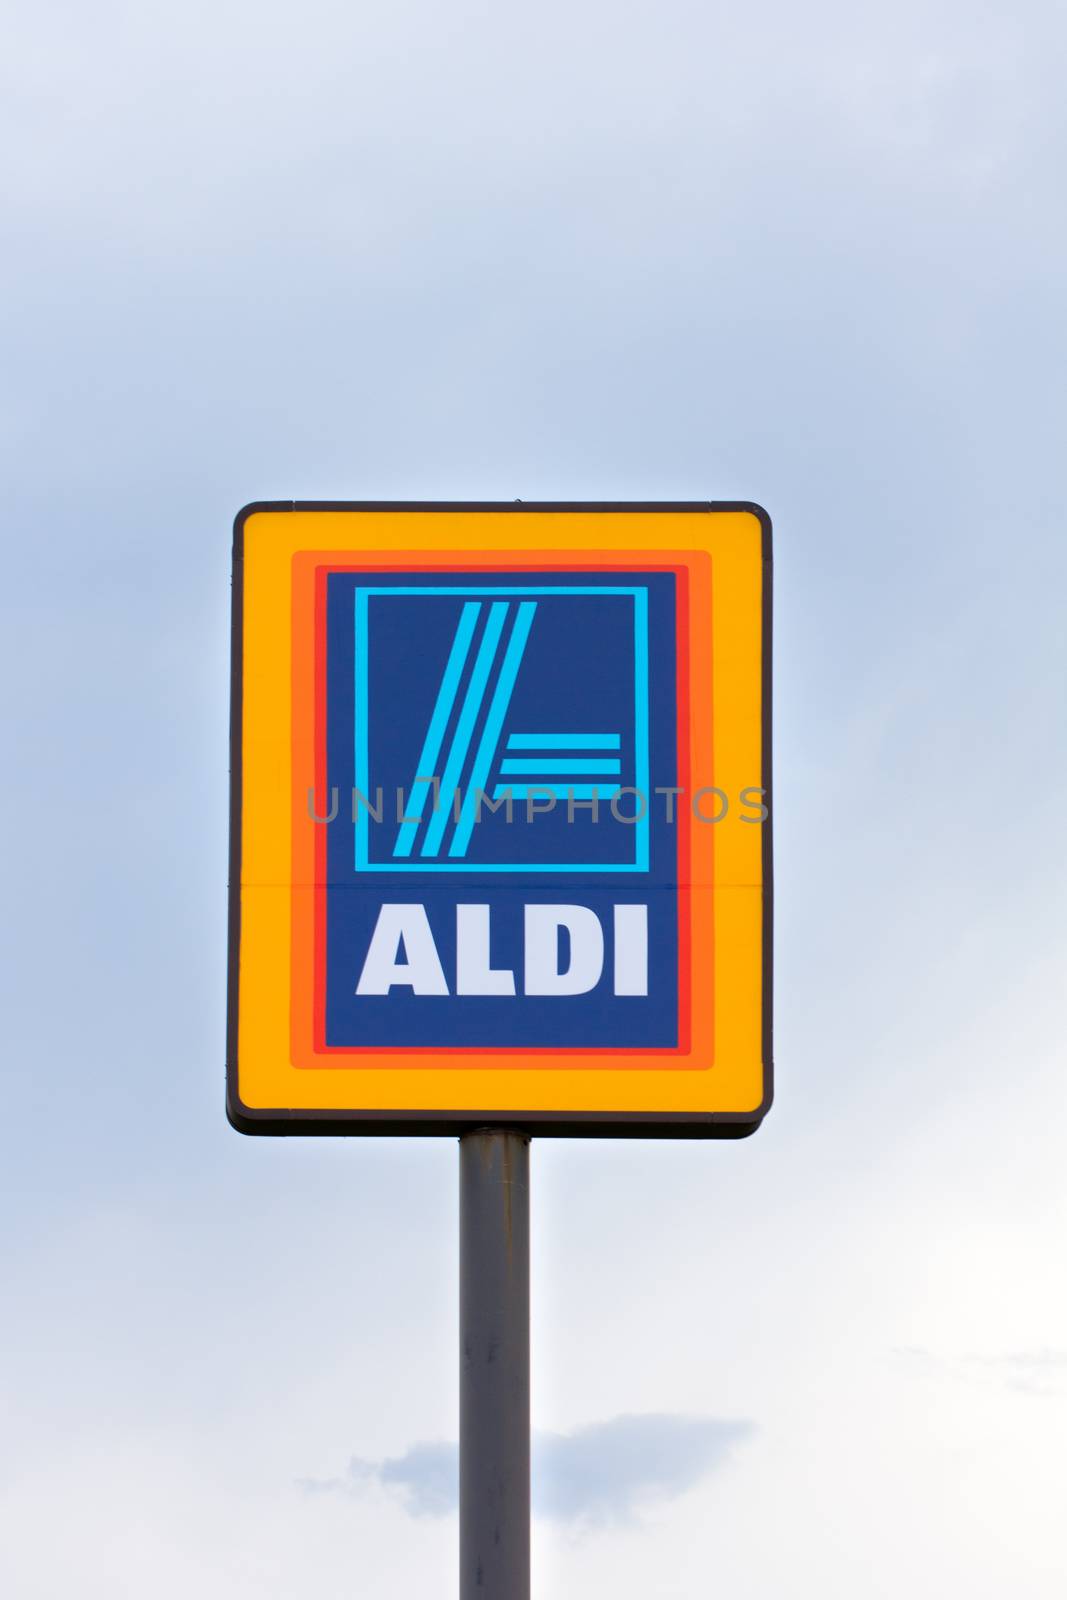 EAU CLAIRE, WI/USA - JUNE 24, 2014:  Aldi grocery store sign.  Aldi is is a global discount supermarket chain based in Germany.